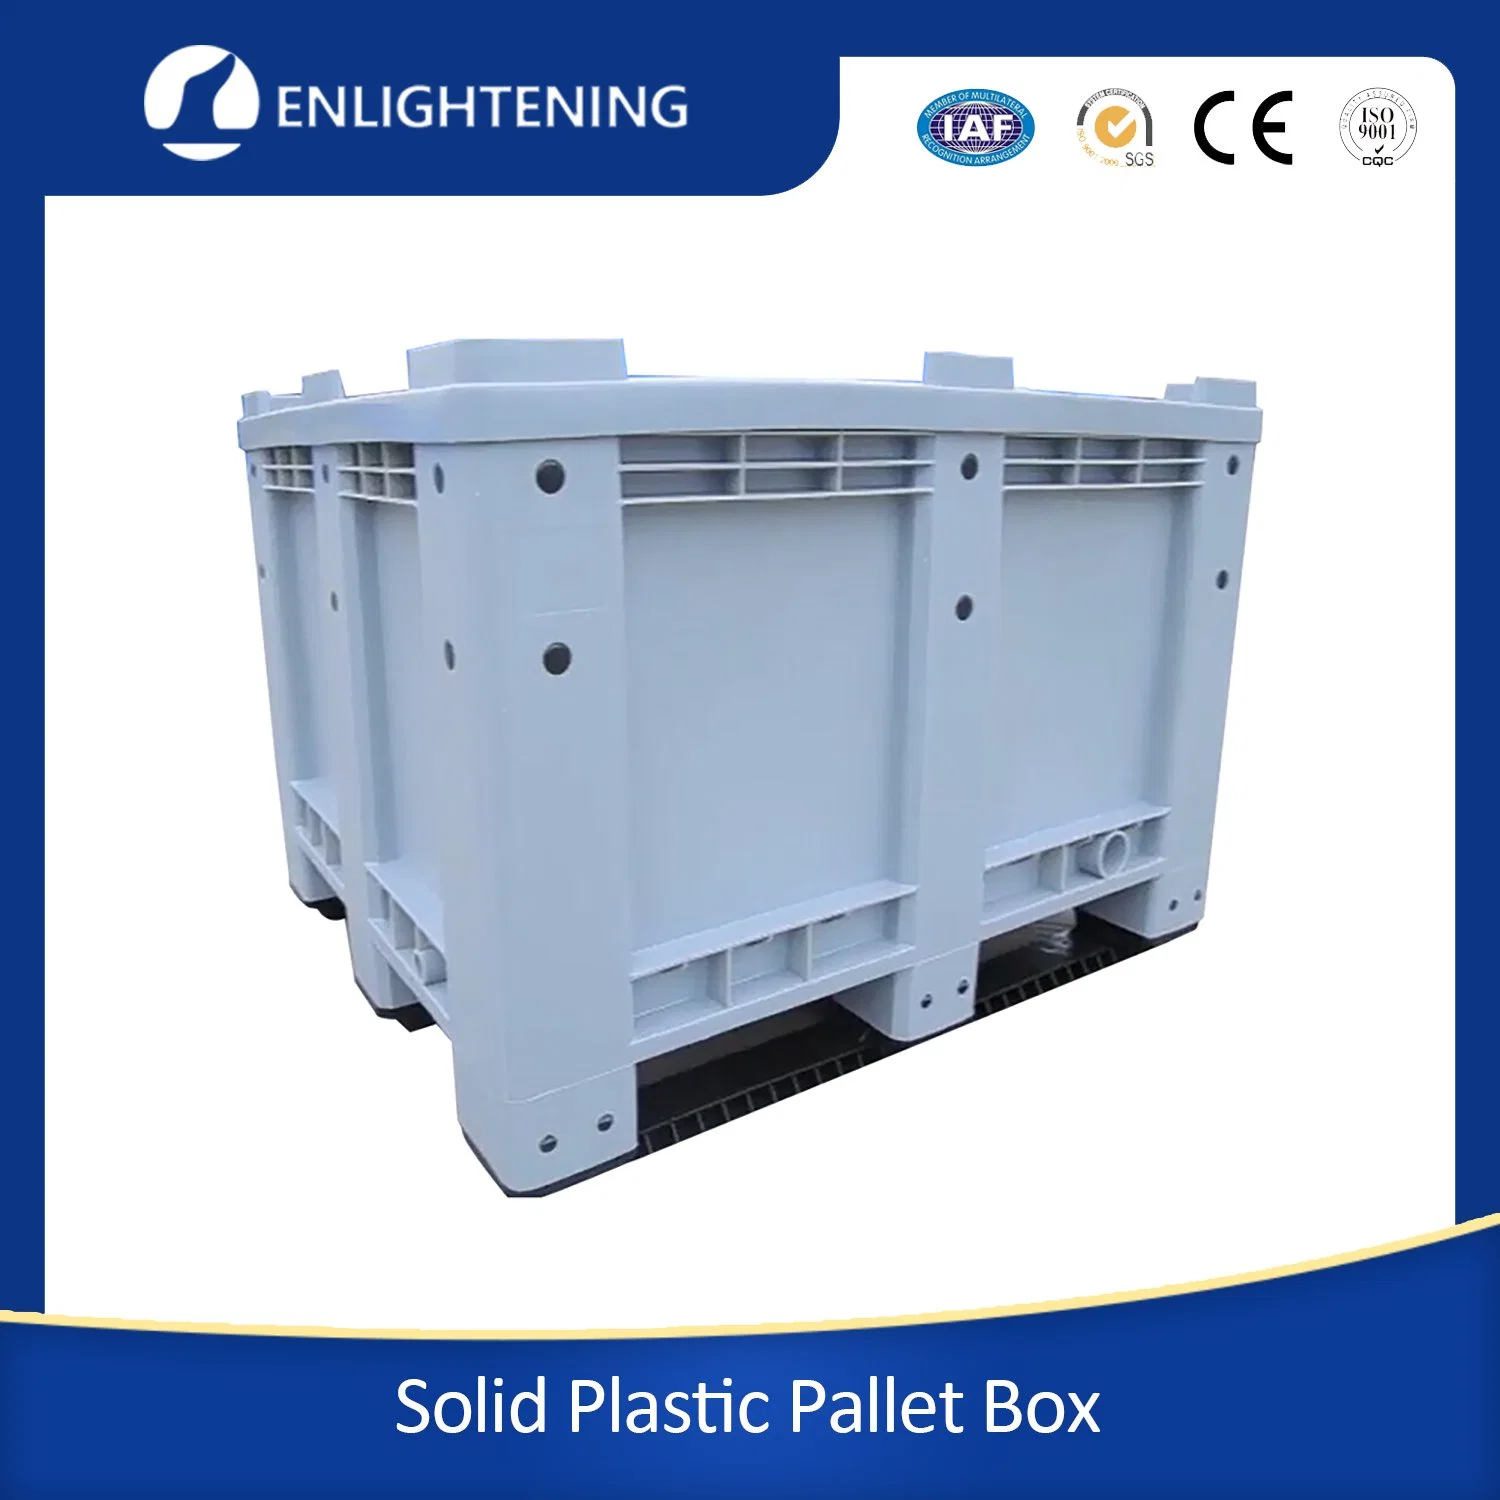 High quality/High cost performance  Solid Plastic Pallet Box Cargo Storage Equipment